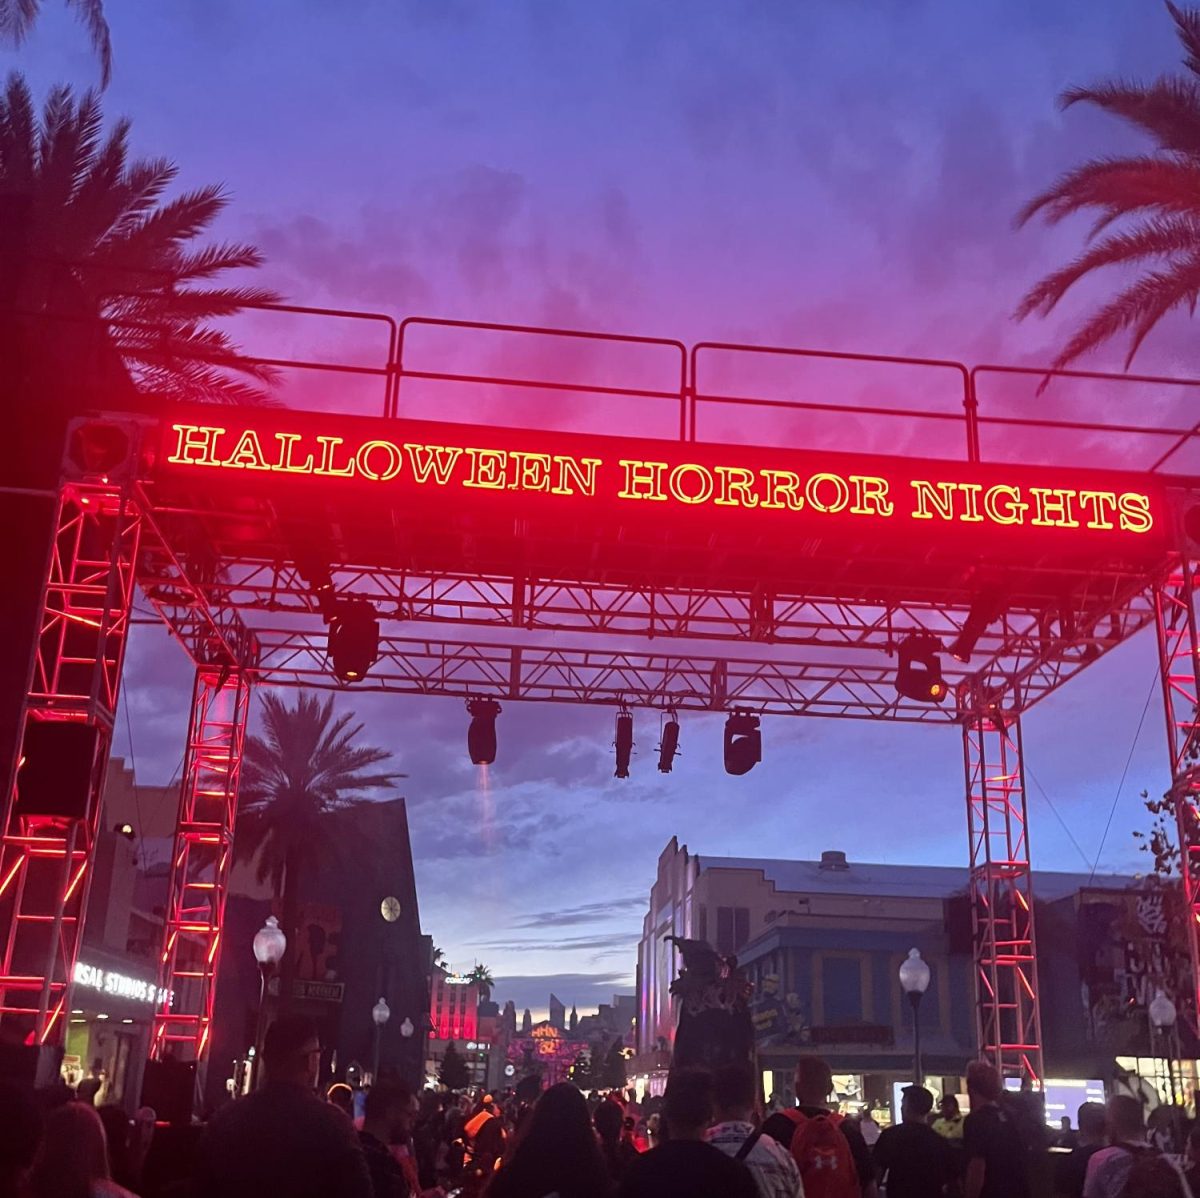 The light-up Halloween Horror Nights sign at the park